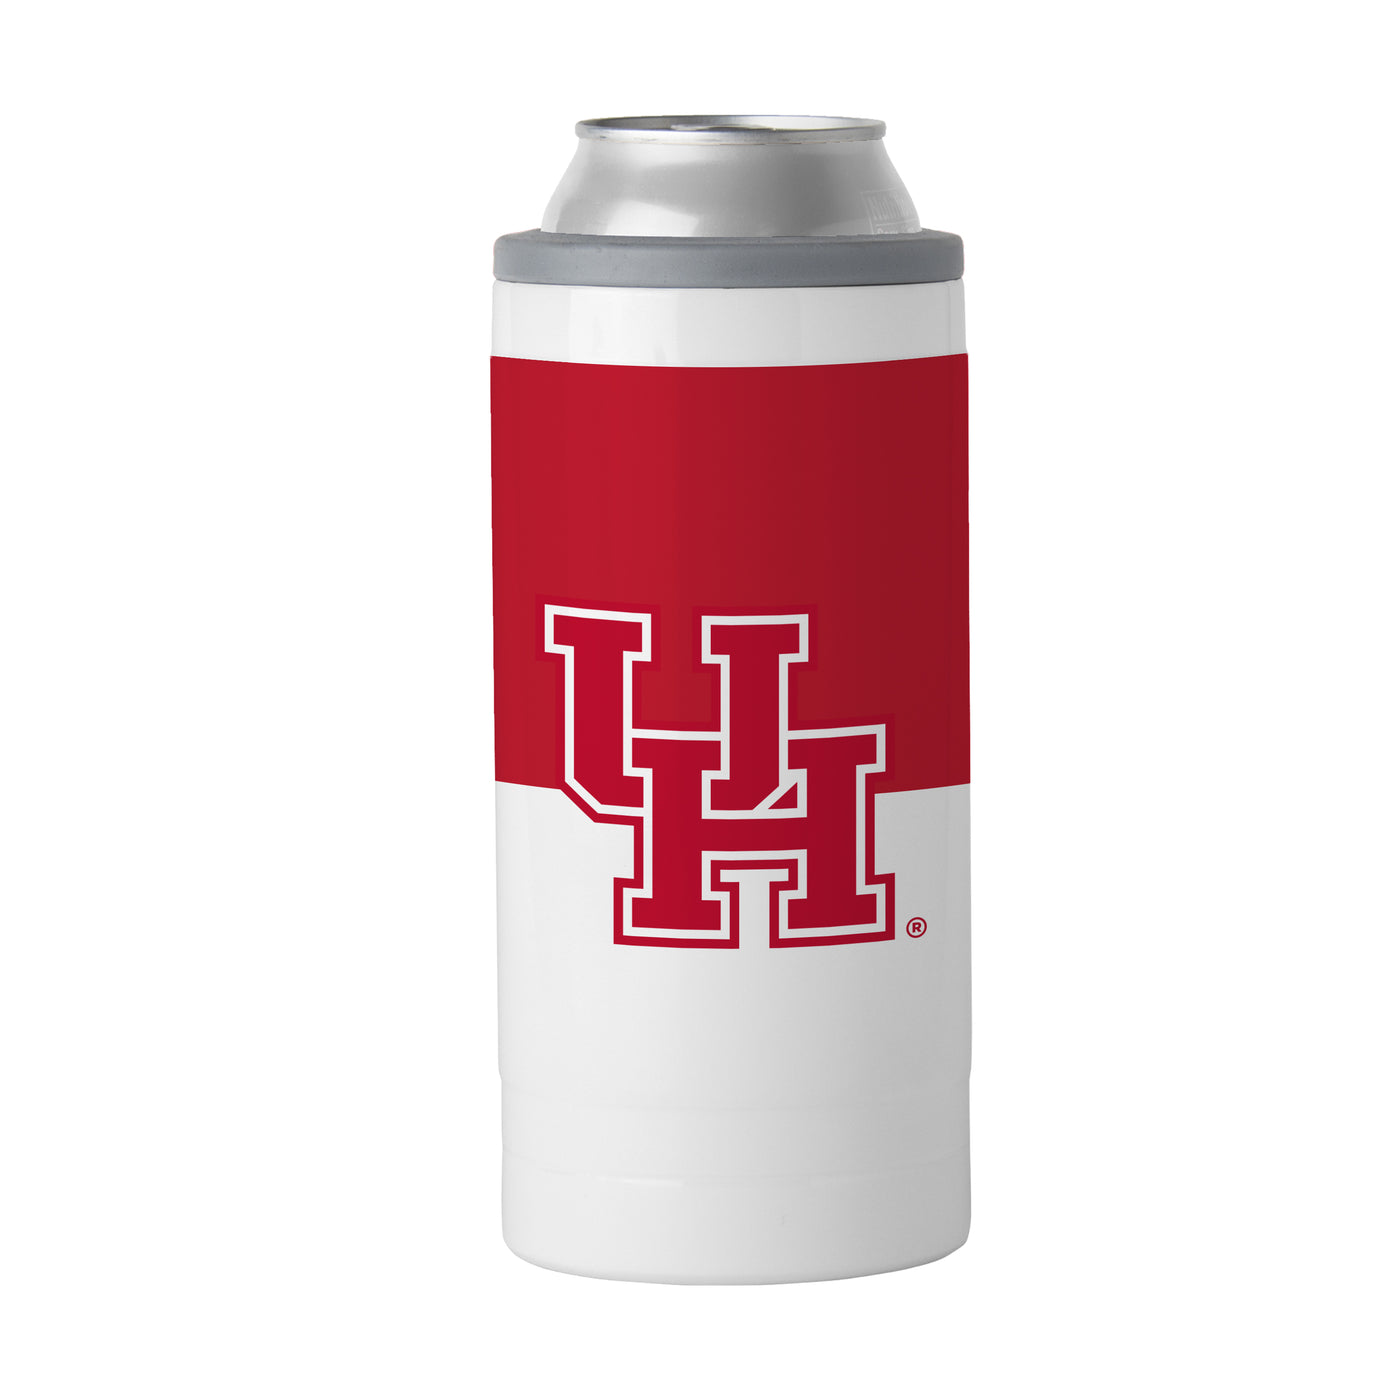 University of Houston Sugarland 12oz Colorblock Slim Can Coolie